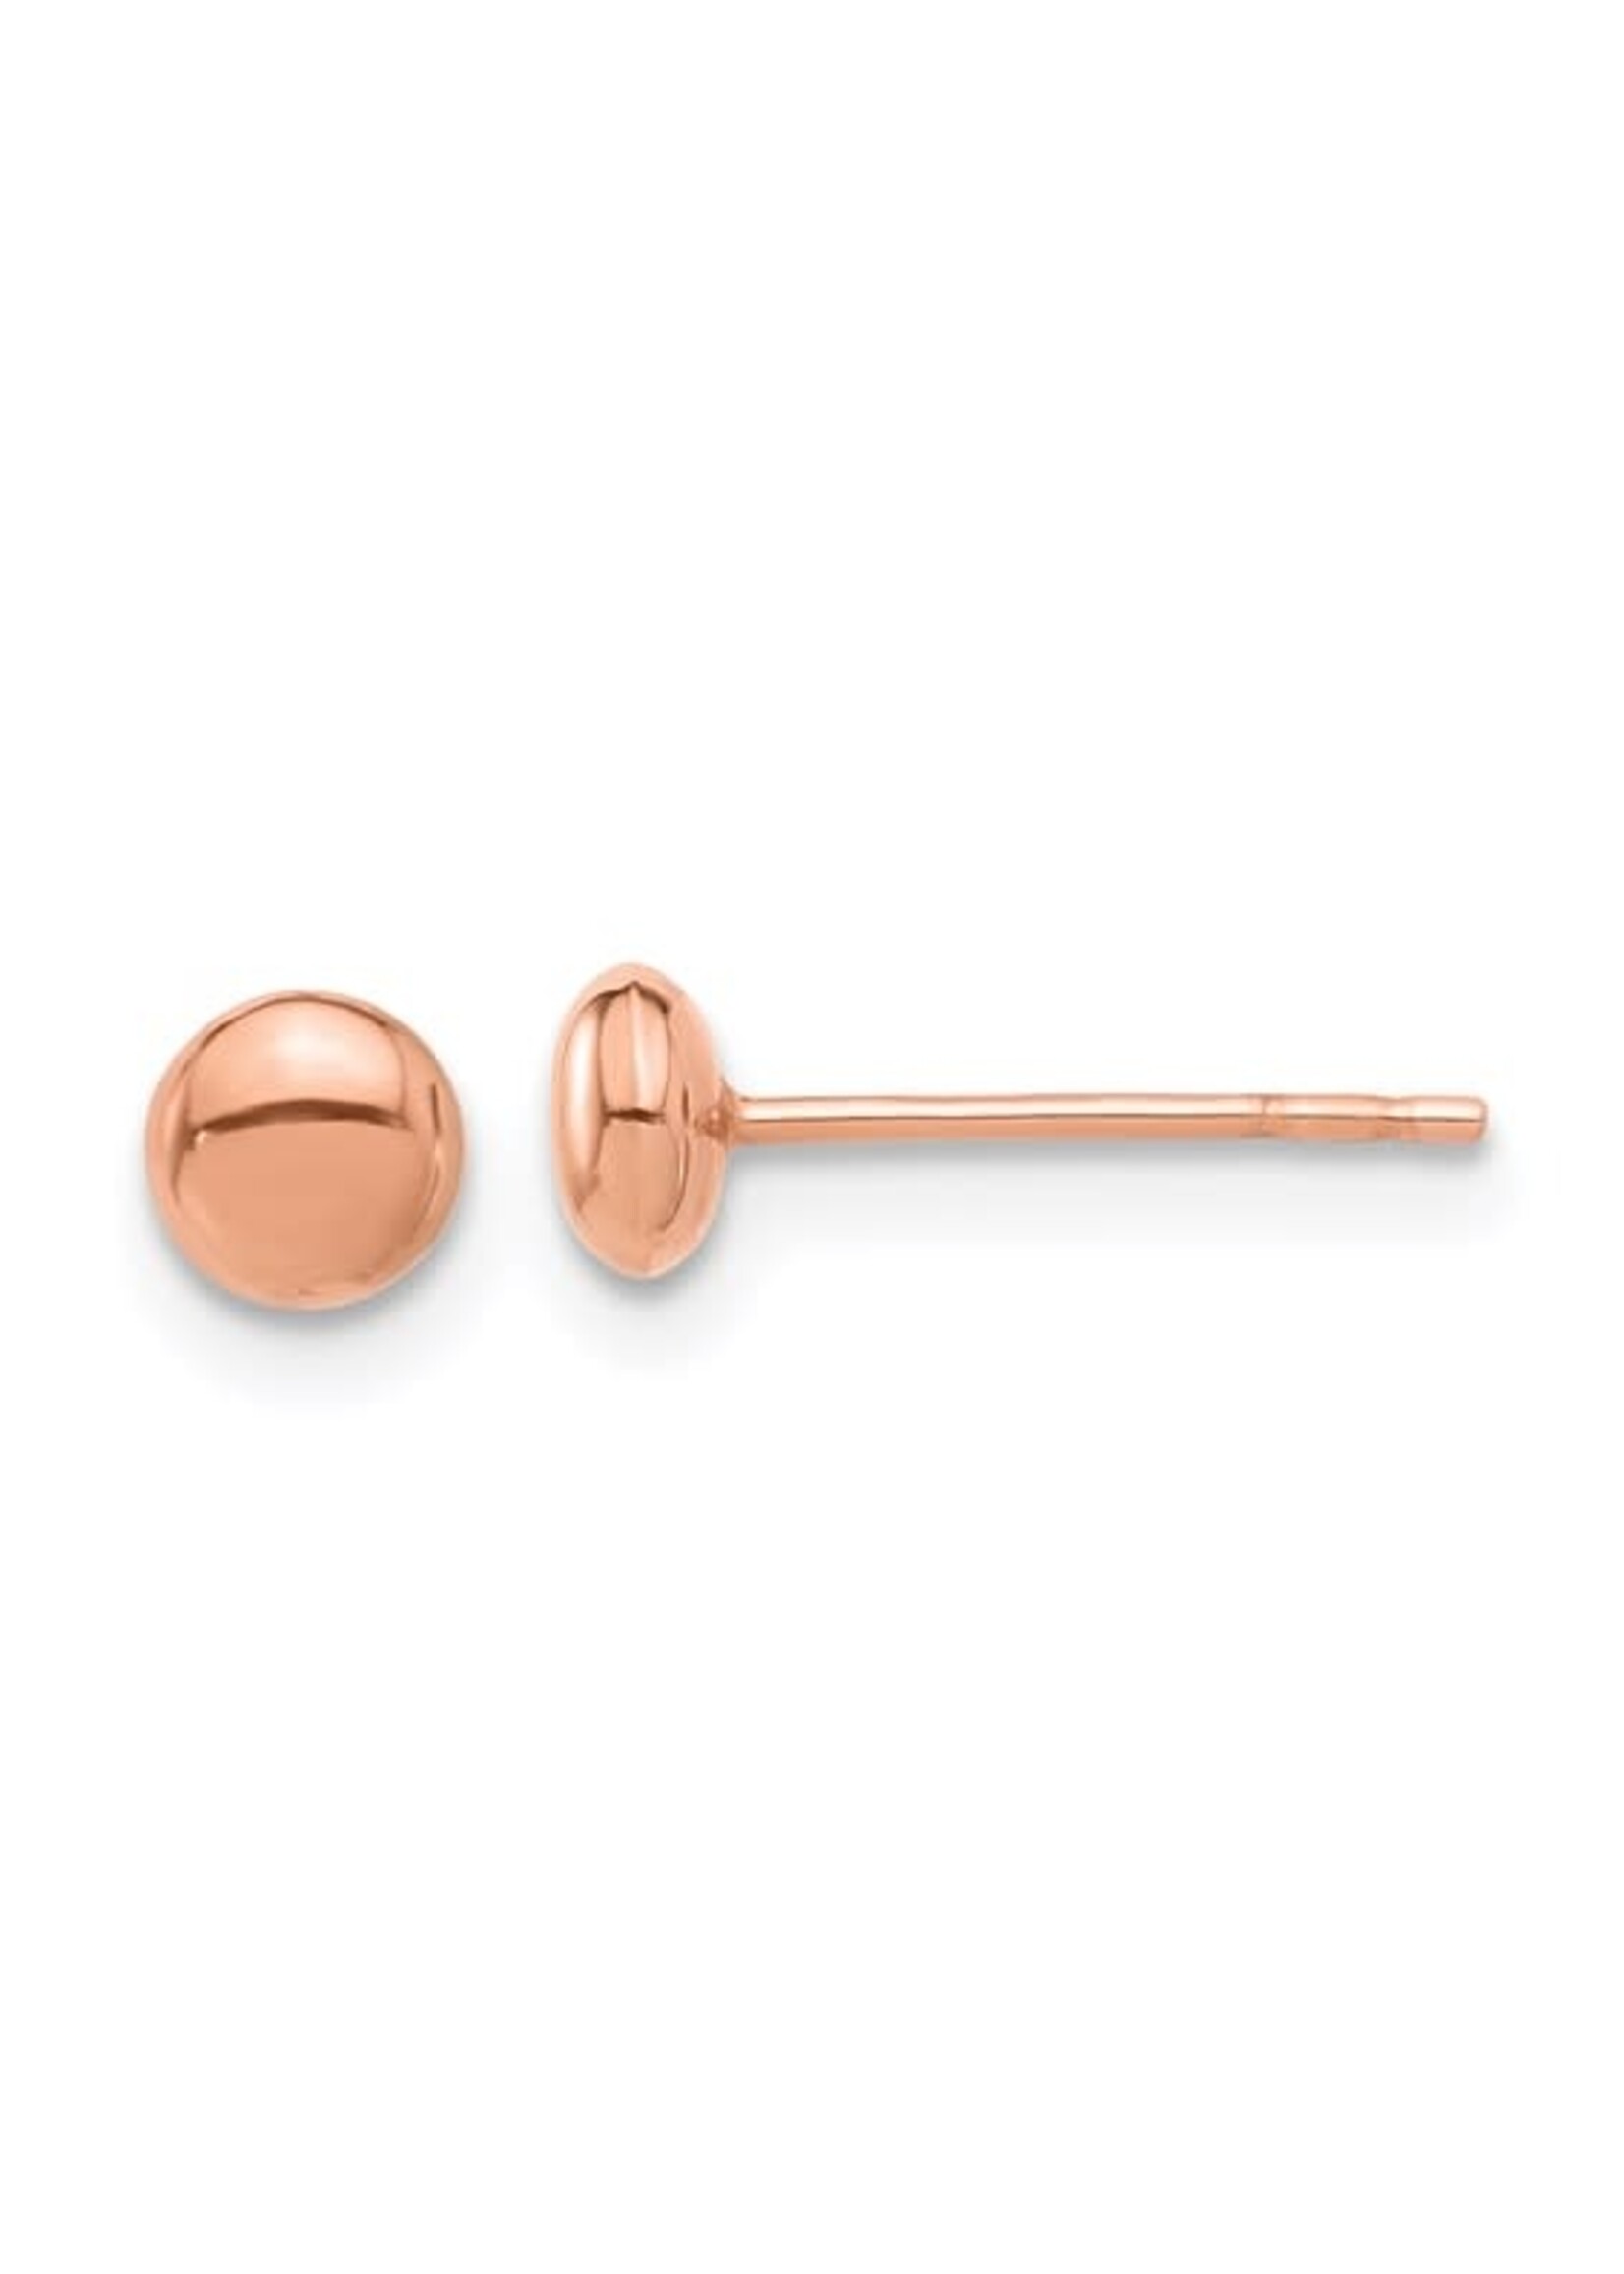 14K Rose Gold Polished 4.5mm Button Post Earrings